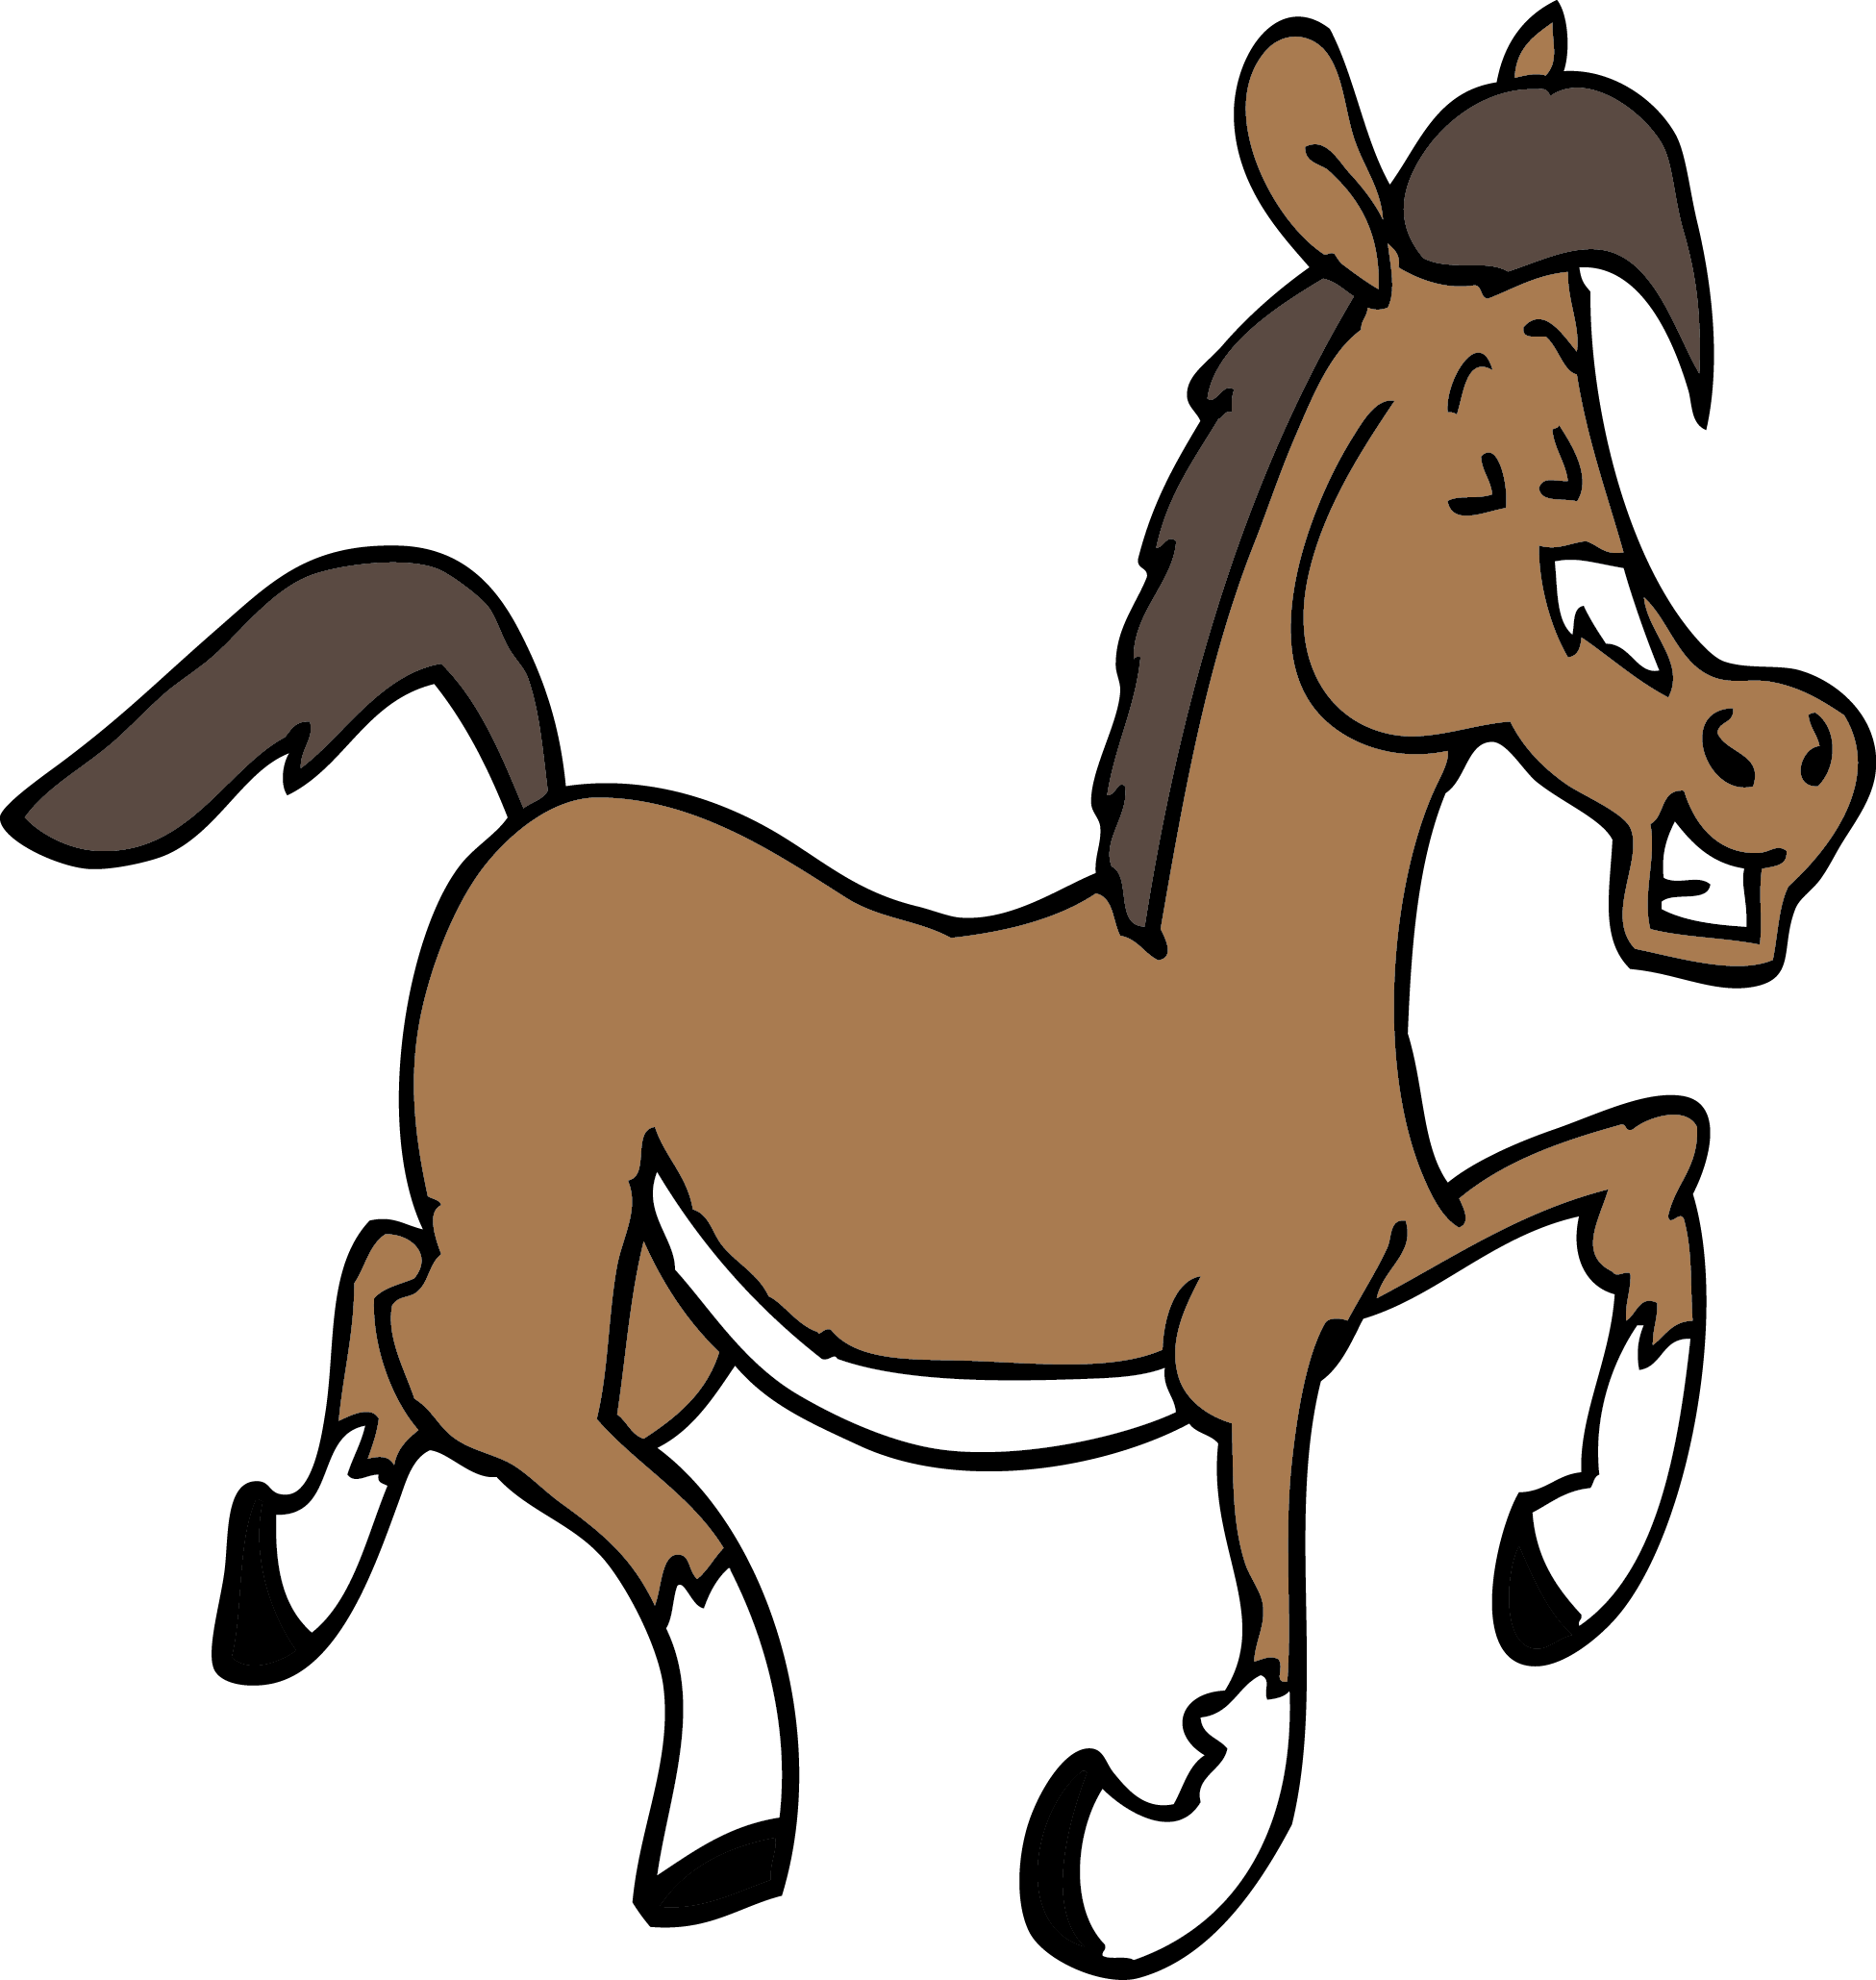 Cartoon Image Of Horse Free download on ClipArtMag